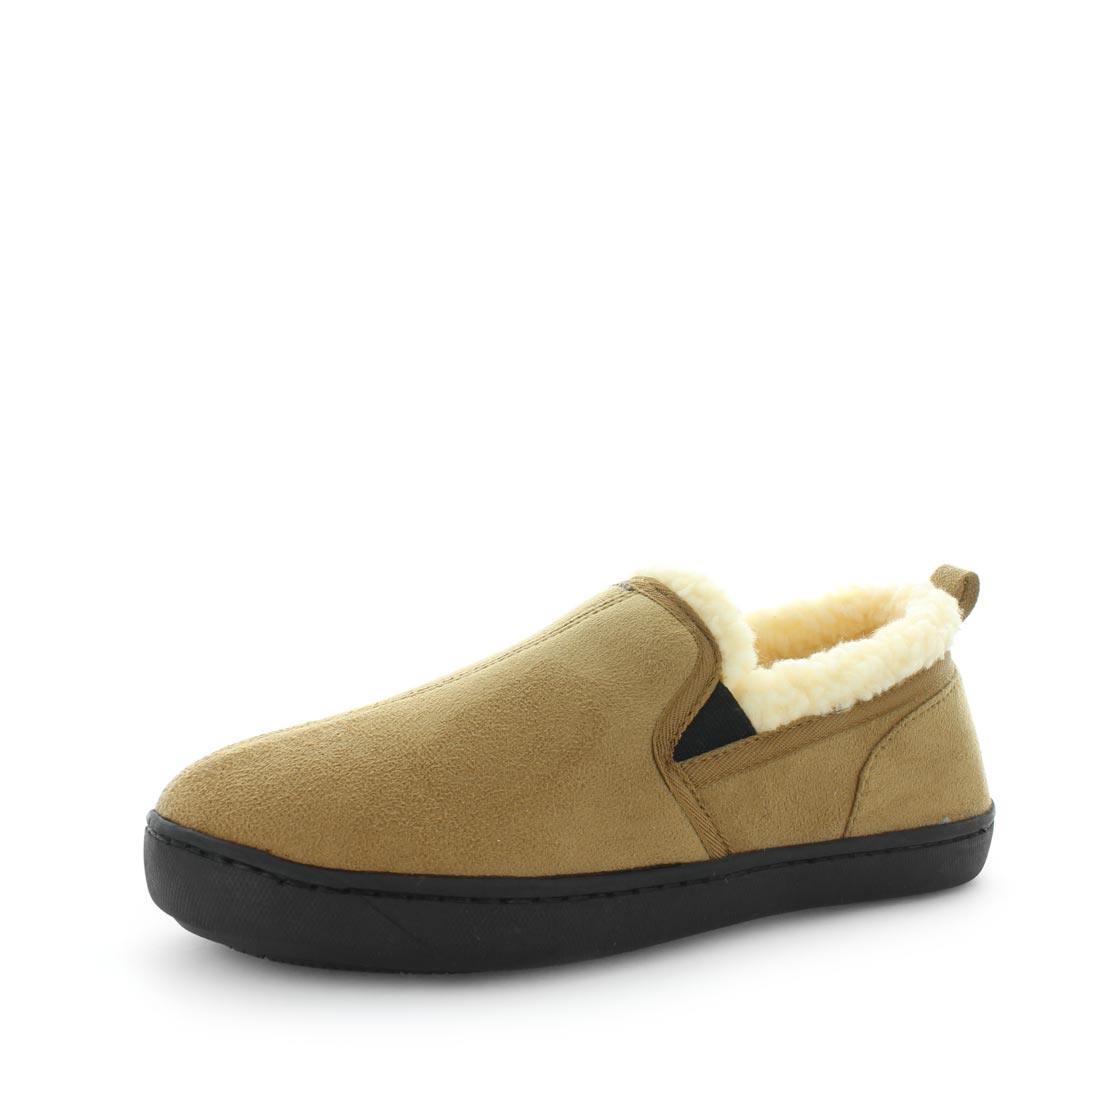 Classic mens slipper, Eliu by panda slippers. A chestnut/camel slip on style slipper with soft materials and comfy fit design for indoor wear. Showing a faux fur trimming and a non slip sole.x